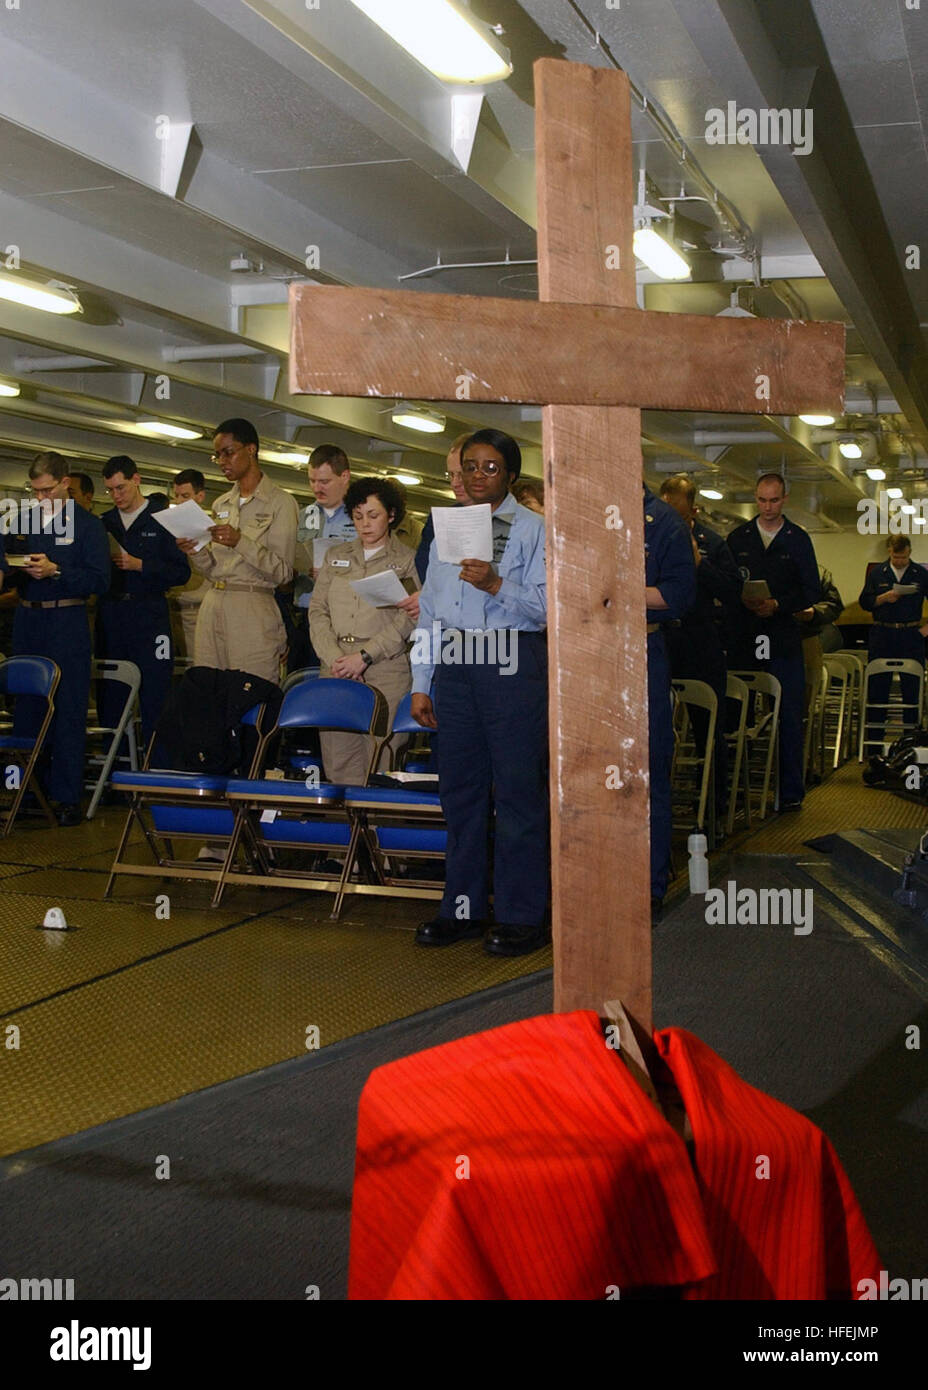 030418-N-4953E-012 Mediterranean Sea (Apr. 18, 2002) -- Sailors and Marines participate in a Good Friday Protestant Service in the Forecastle of USS Harry S. Truman (CVN 75).  Truman and her embarked Carrier Air Wing Three (CVW-3) are on deployment conducting combat missions in support of Operation Iraqi Freedom.  Operation Iraqi Freedom is the multi-national coalition effort to liberate the Iraqi people, eliminate Iraq's weapons of mass destruction, and end the regime of Saddam Hussein.  U.S. Navy photo by Photographer's Mate 3rd Class Danny Ewing Jr.  (RELEASED) US Navy 030418-N-4953E-012 Sa Stock Photo